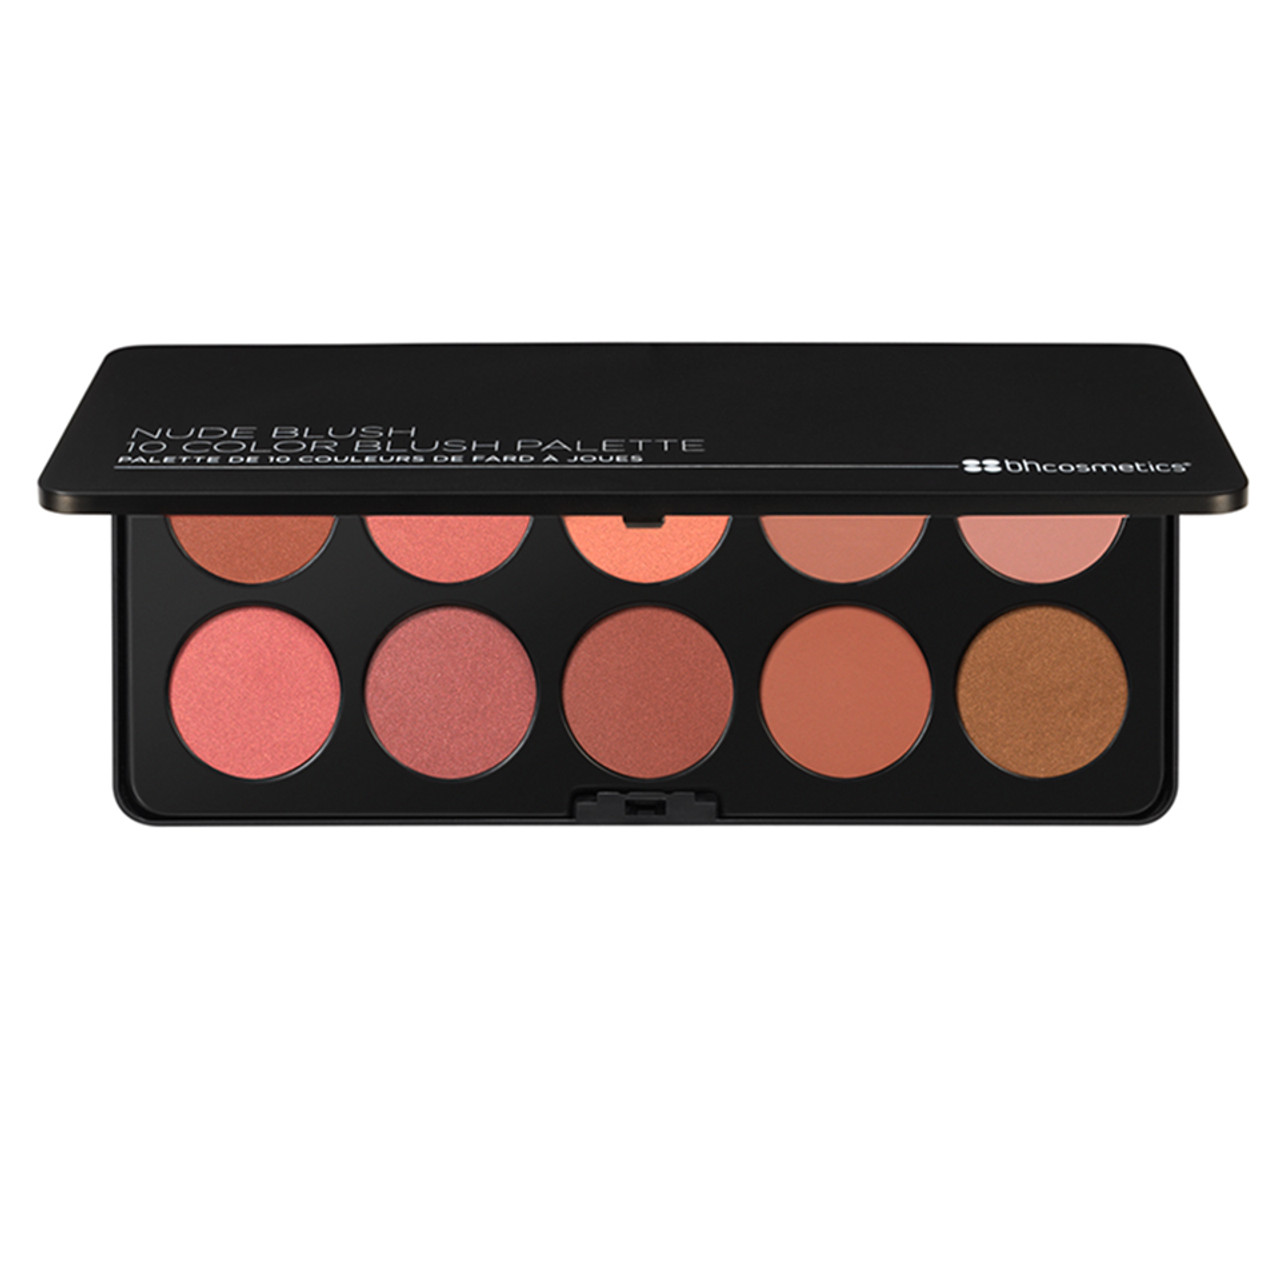 BH Cosmetics Nude Blush 10 Colour Palette at BEAUTY BAY